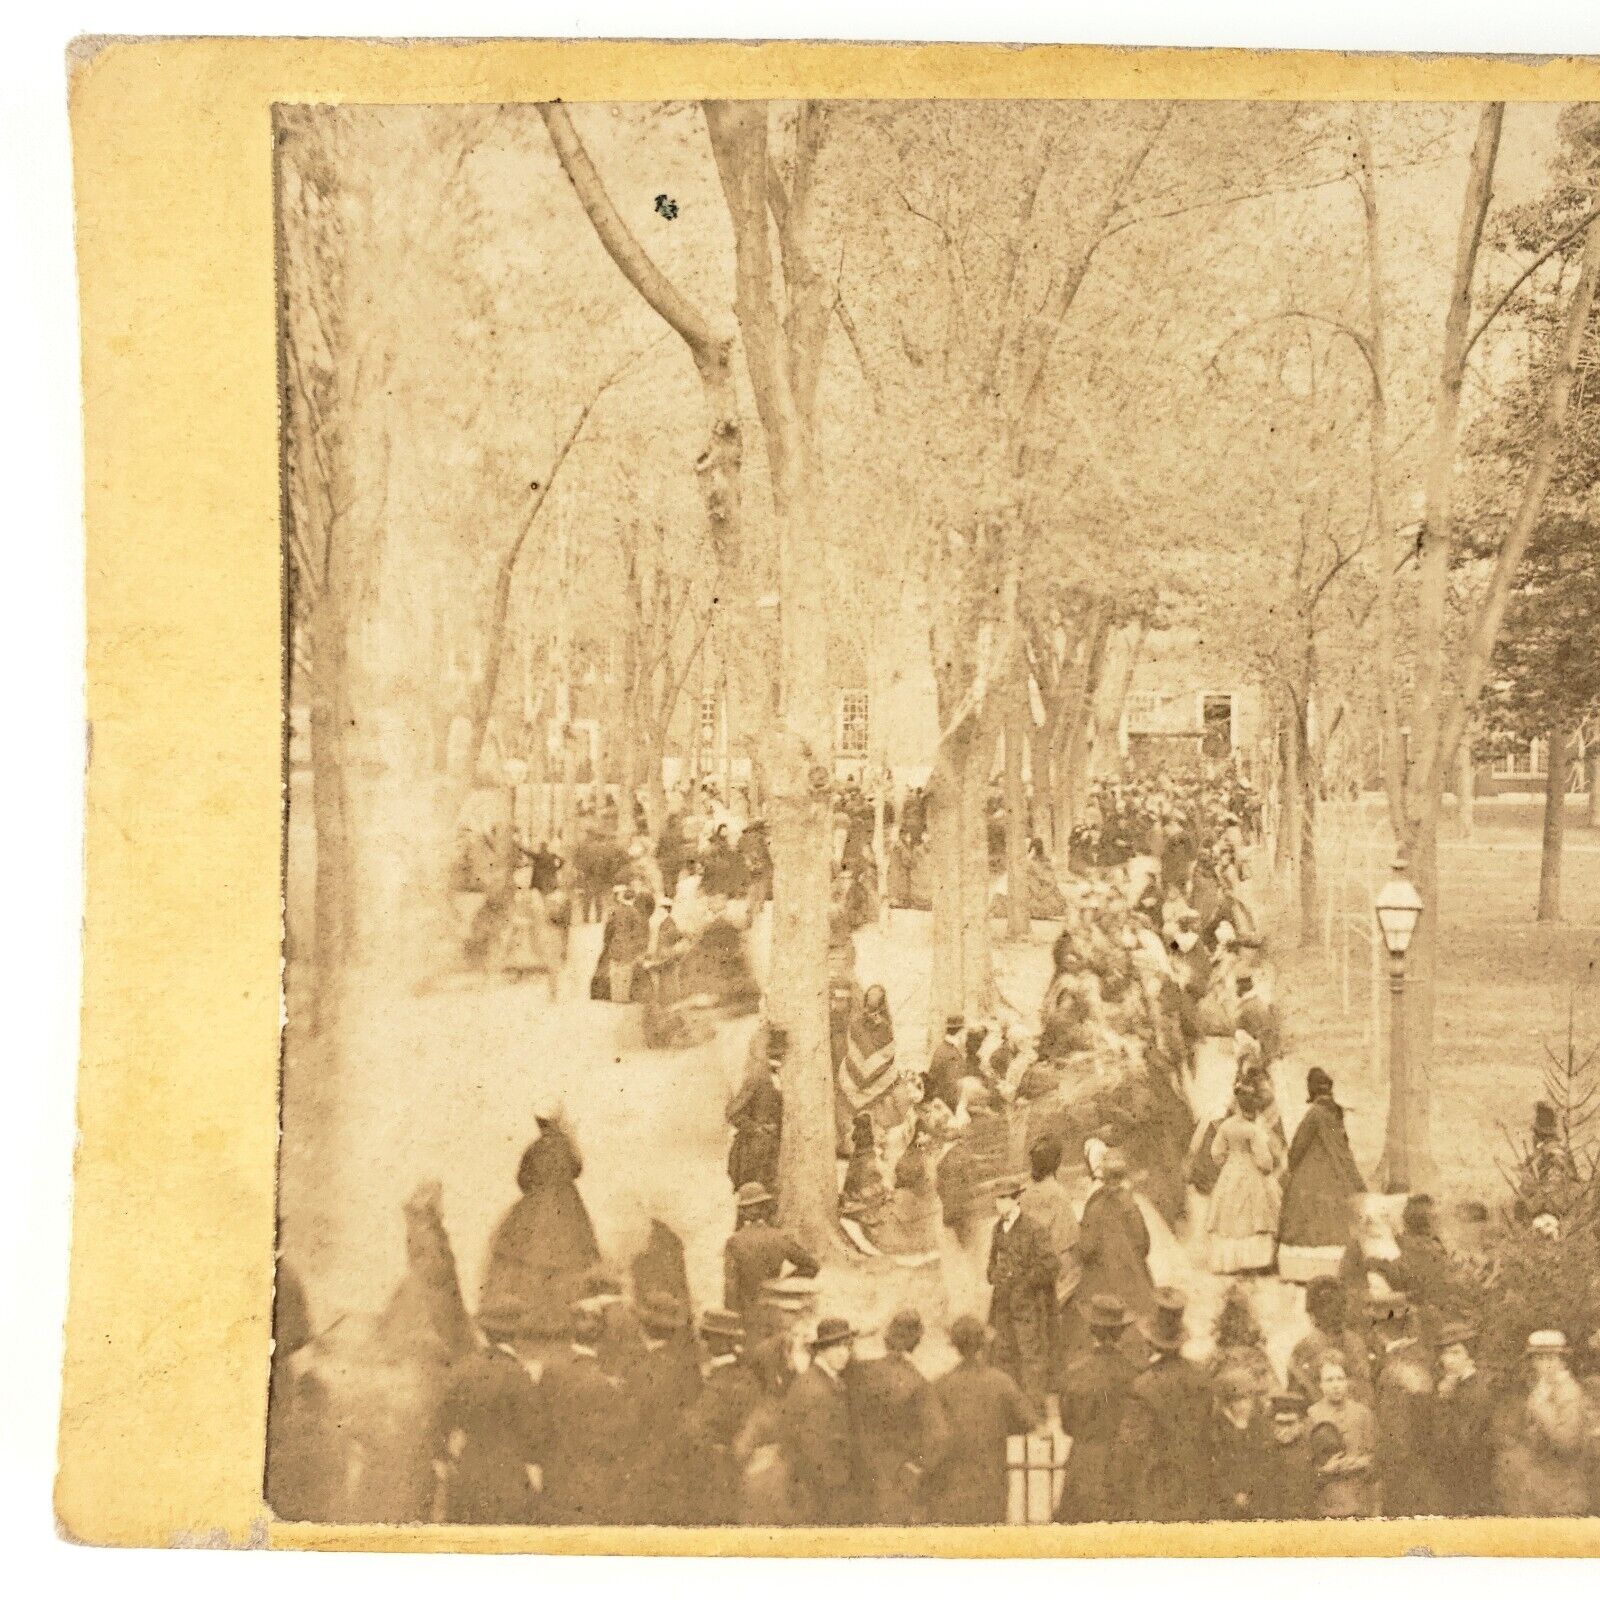 President Abe Lincoln Funeral Stereoview c1865 Philadelphia Independence Square